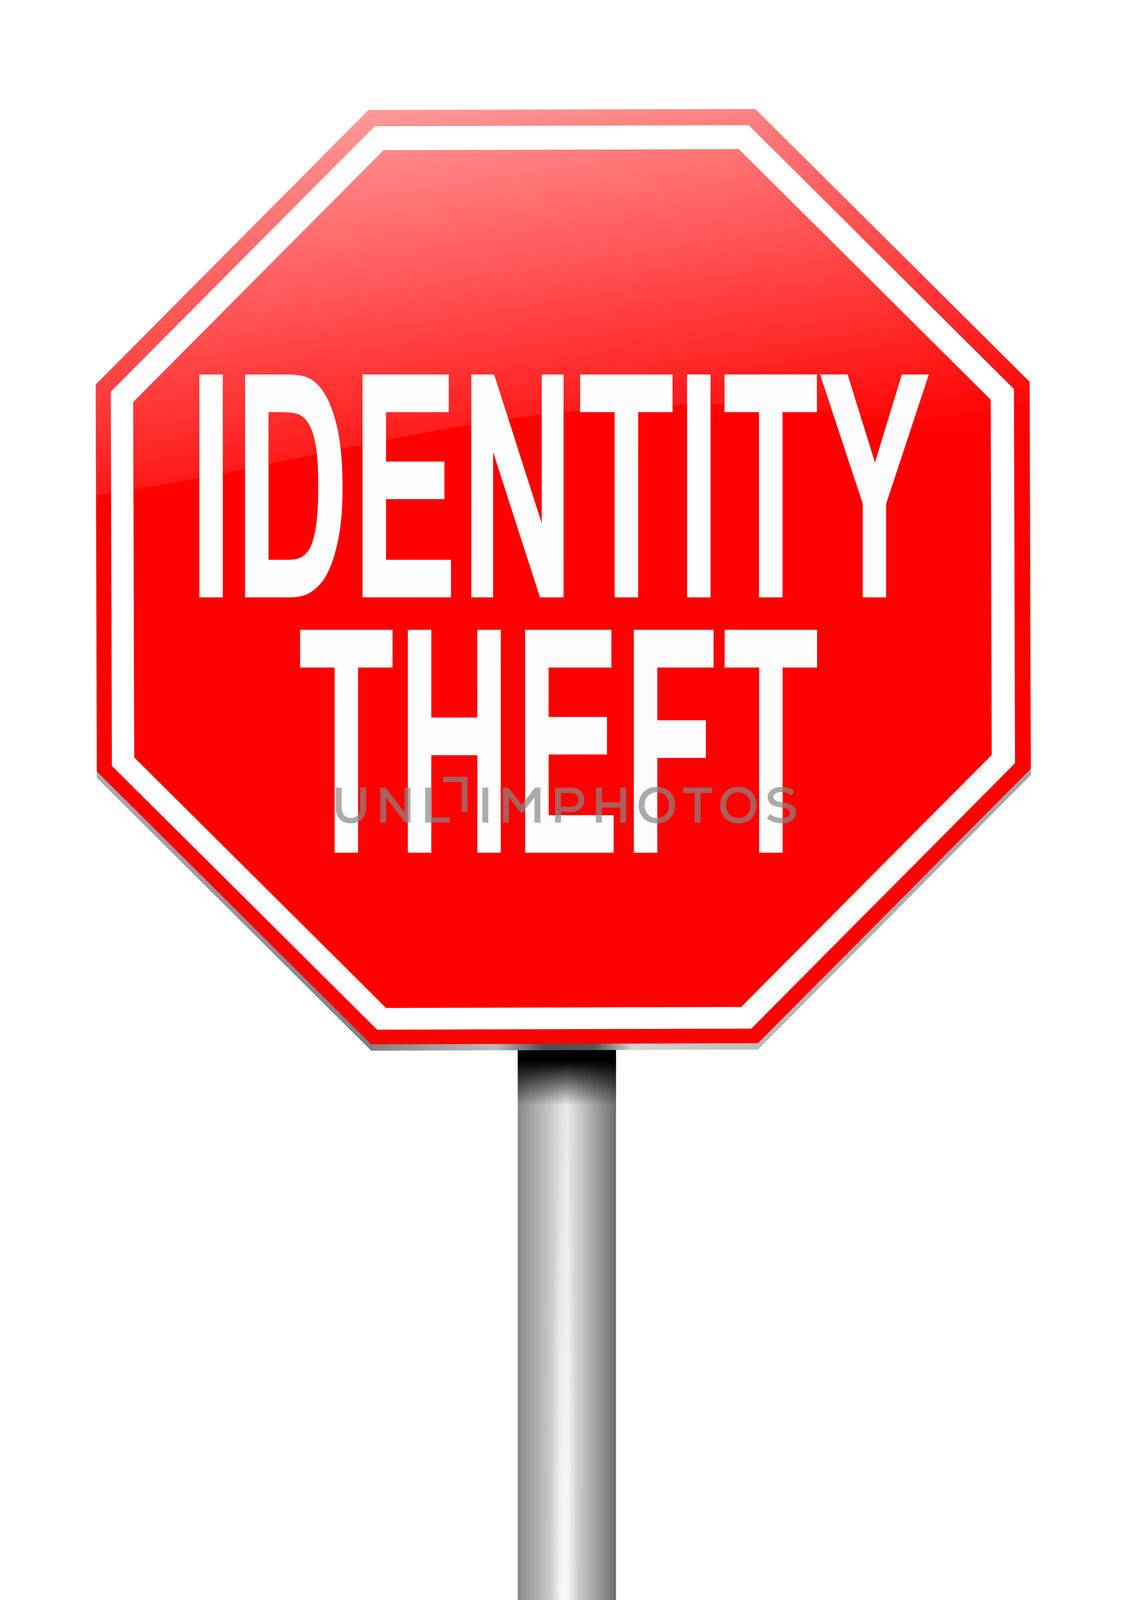 Illustration depicting a roadsign with an identity theft concept. White background.